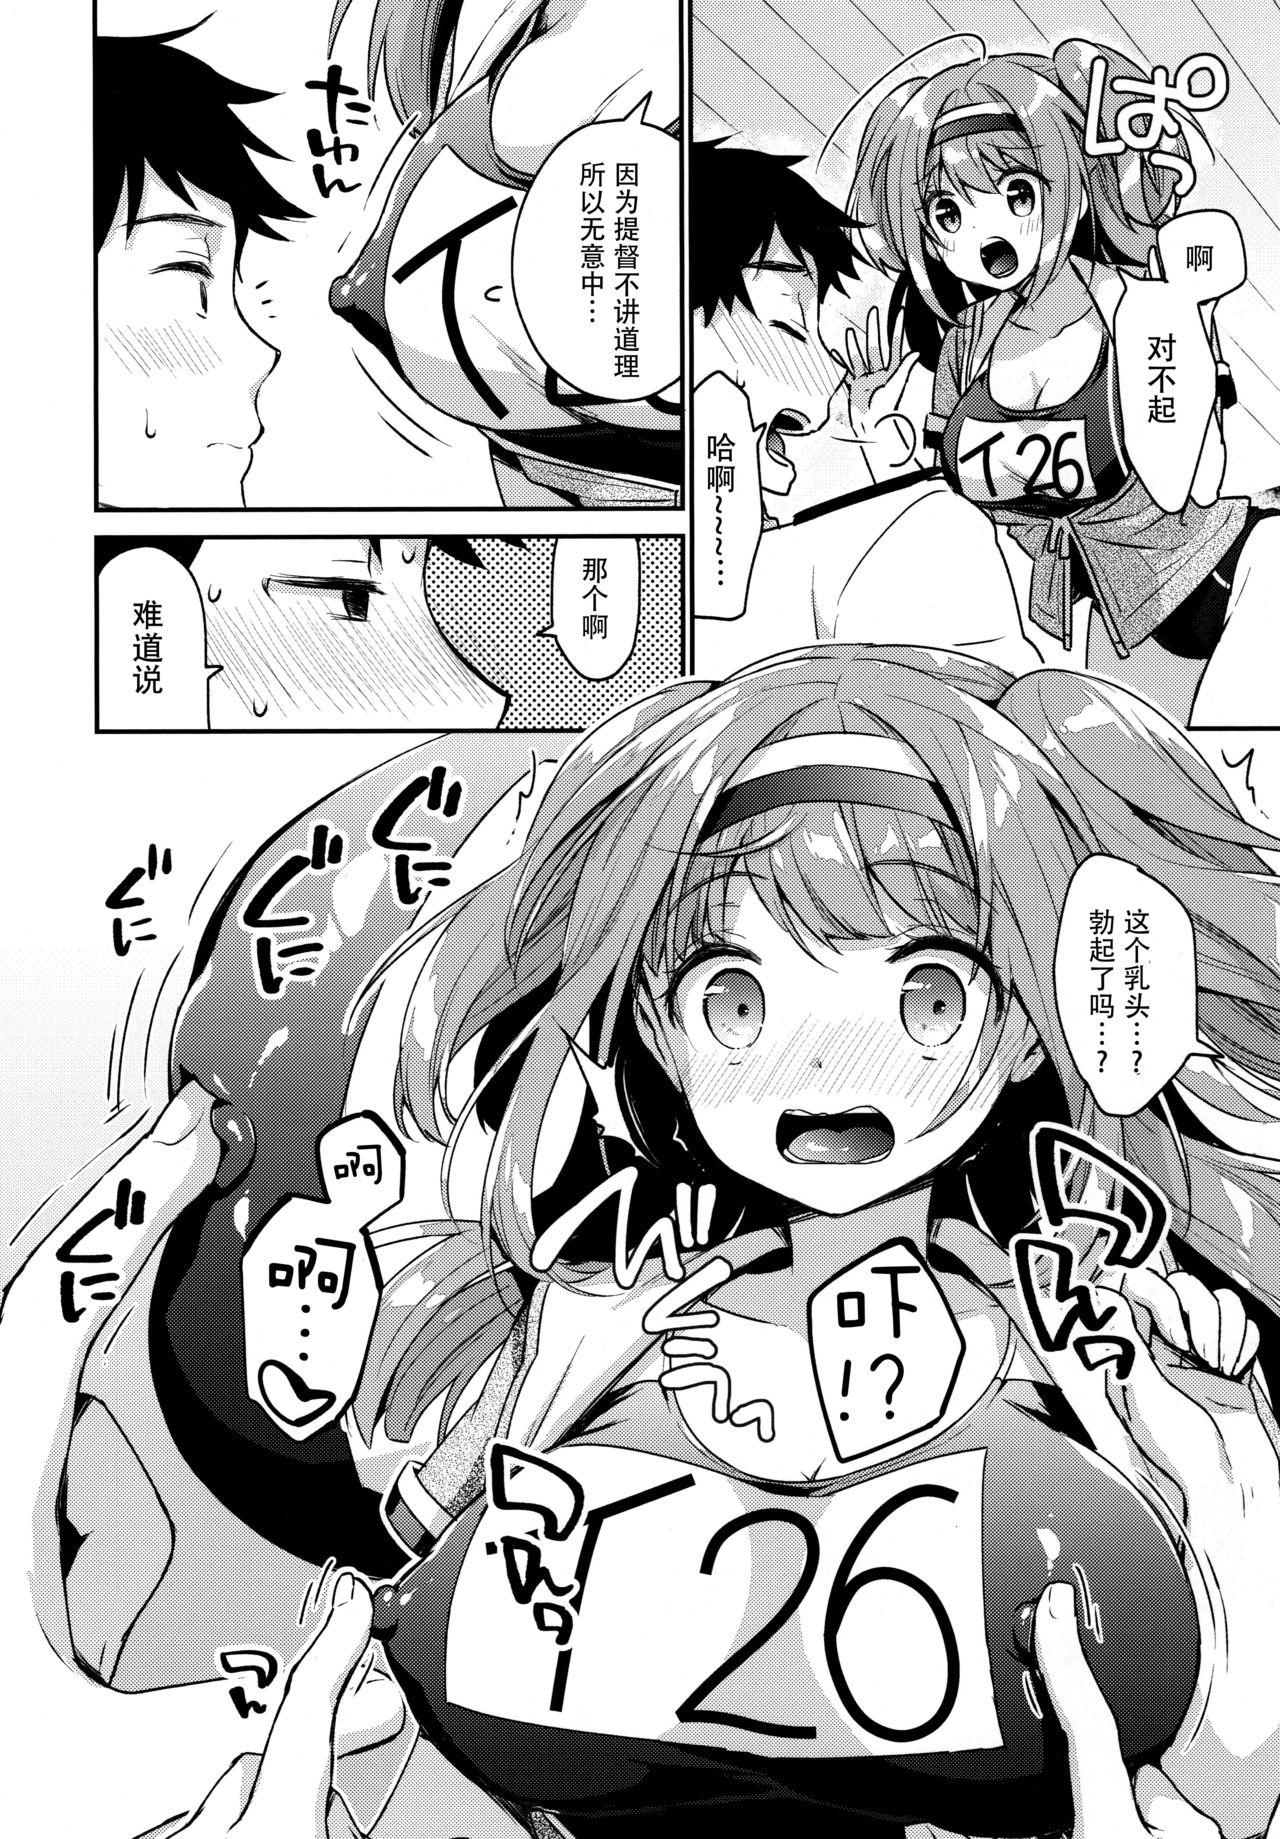 Gostoso Nimu tte Yonde - Kantai collection Real Amature Porn - Page 10